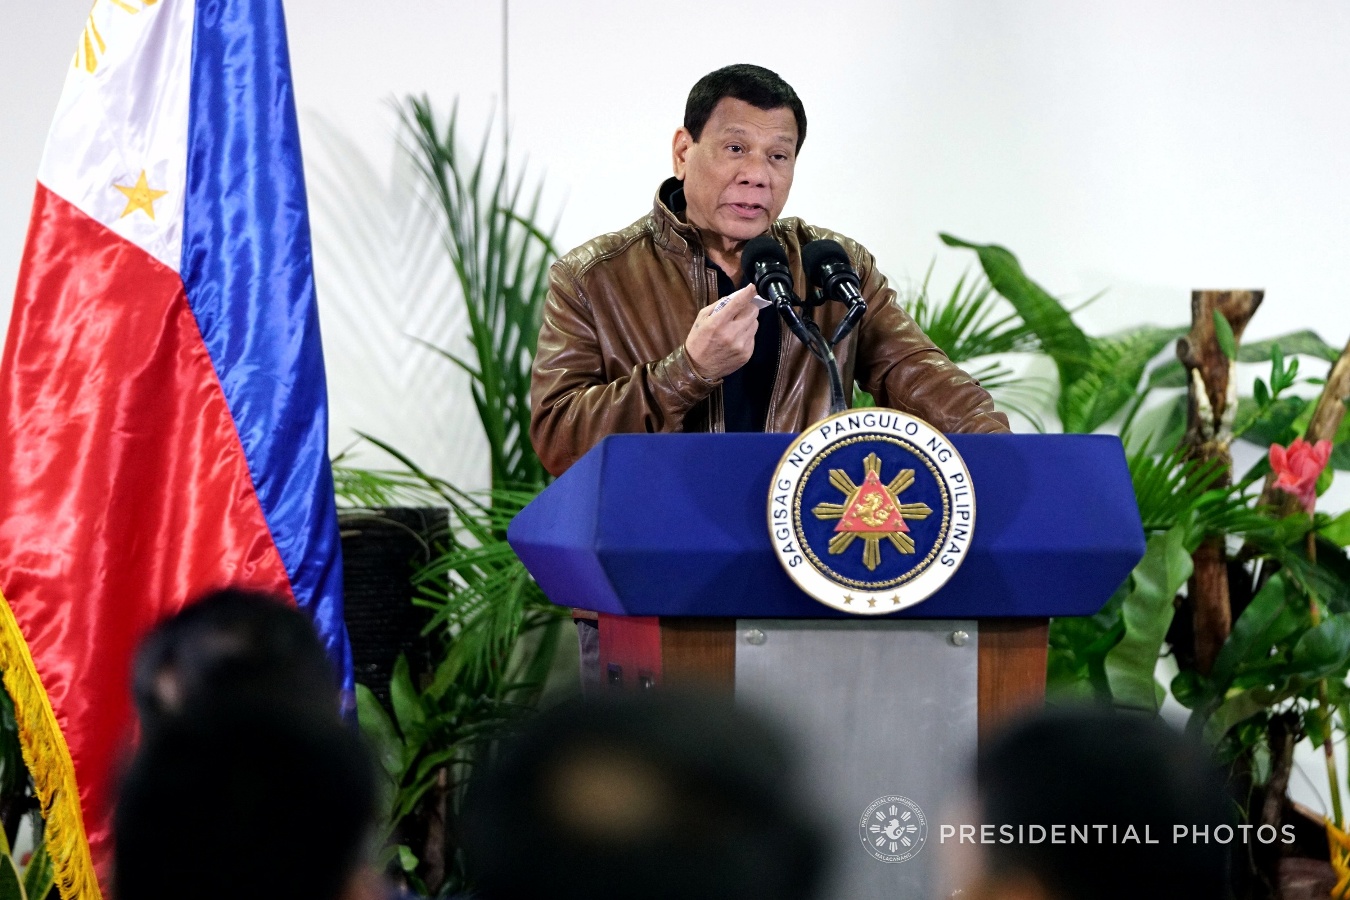 President Rodrigo Roa Duterte, in his speech during his arrival at the Francisco Bangoy International Airport in Davao City on January 26, 2018 following a fruitful visit to India, announces that India has agreed to expand cooperation with the Philippines in the areas of defense, counter-terrorism and anti-illegal drugs campaign. JOEY DALUMPINES/PRESIDENTIAL PHOTO